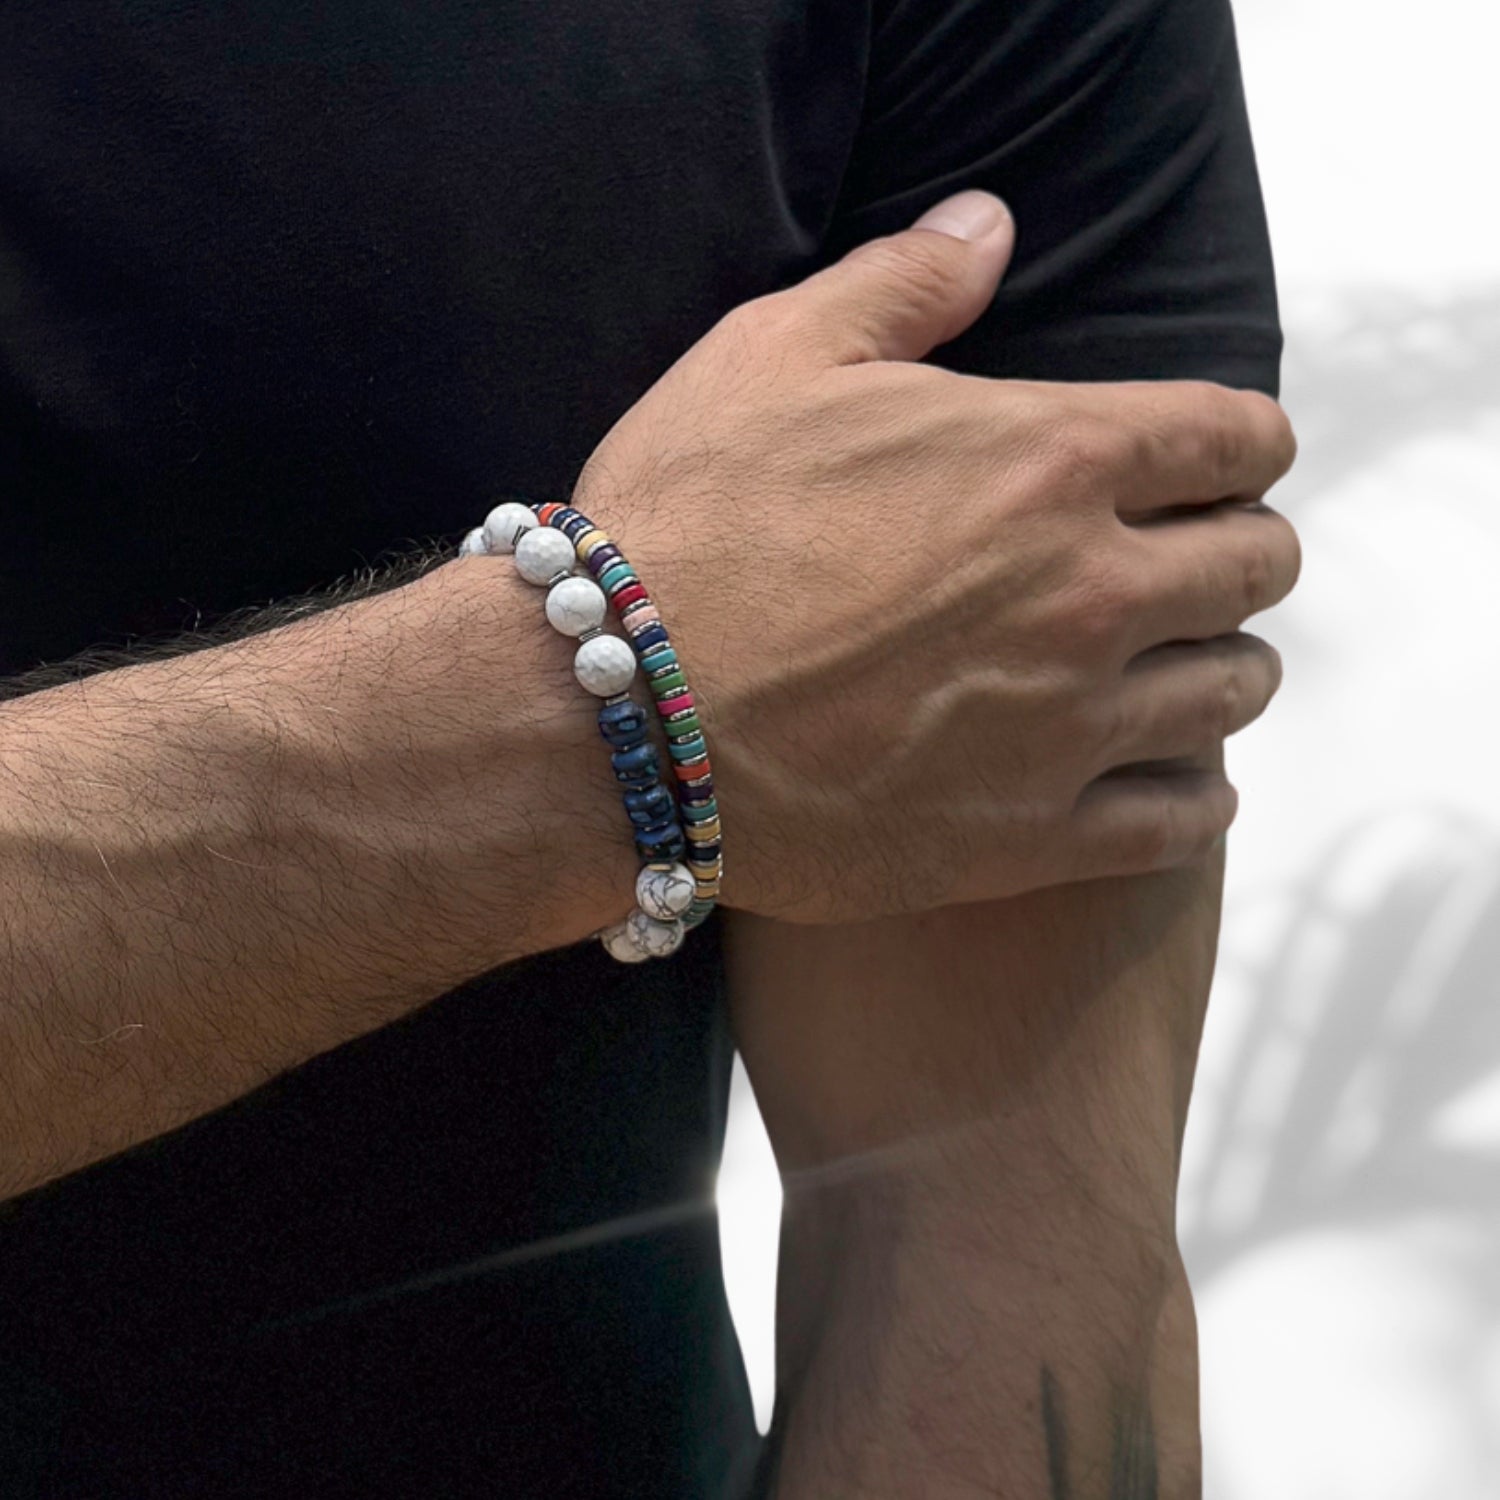 Men's Spiritual Energy Bracelet with white howlite beads and blue Nepal beads, perfect for a vibrant and balanced look